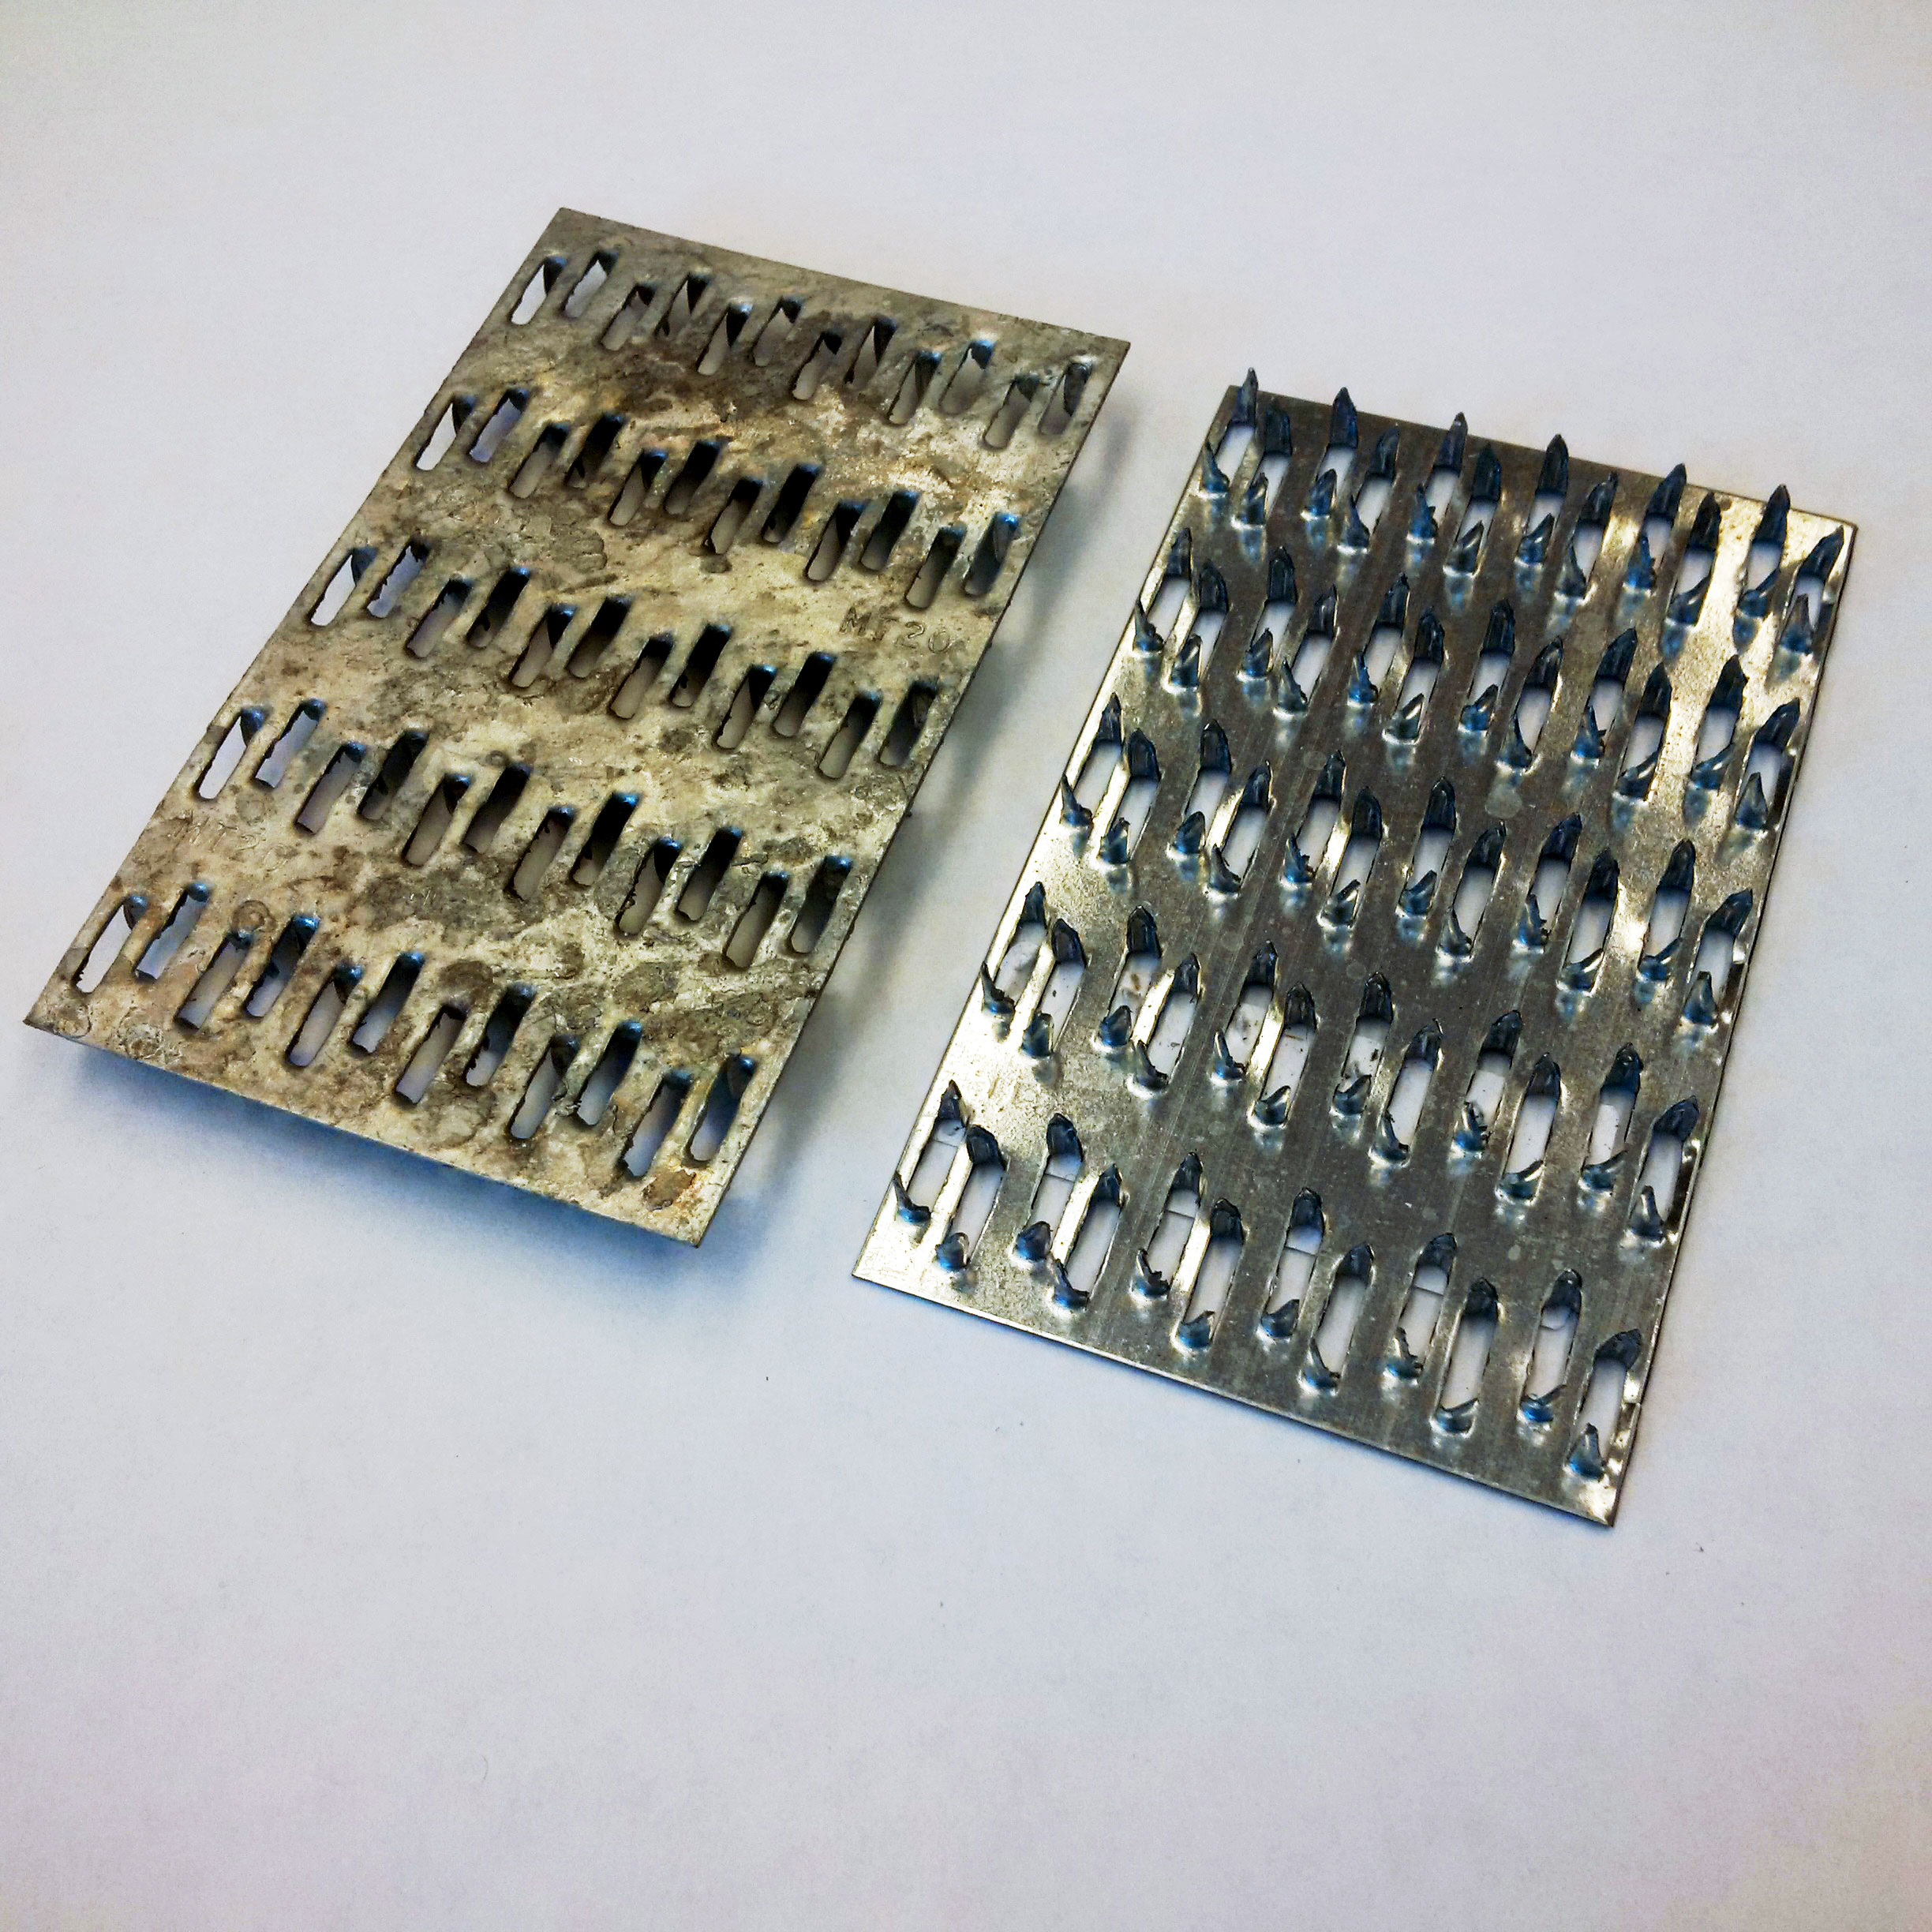 Two examples of connector plates, to illustrate the protrusions or teeth from punching during fabrication. Also shown is the visual difference in finish between using pre-galvanized plate and galvanizing after plate fabrication.